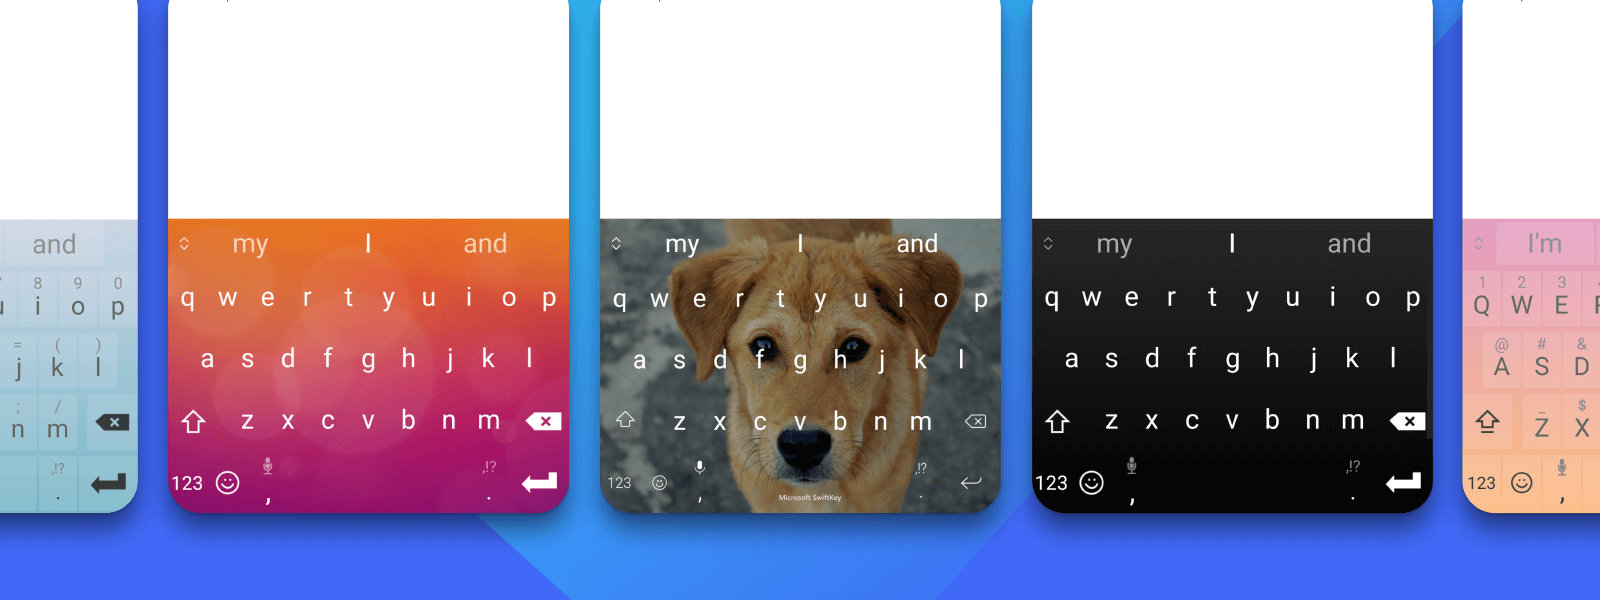 Multiple SwiftKey keyboards side by side, in different styles and colors